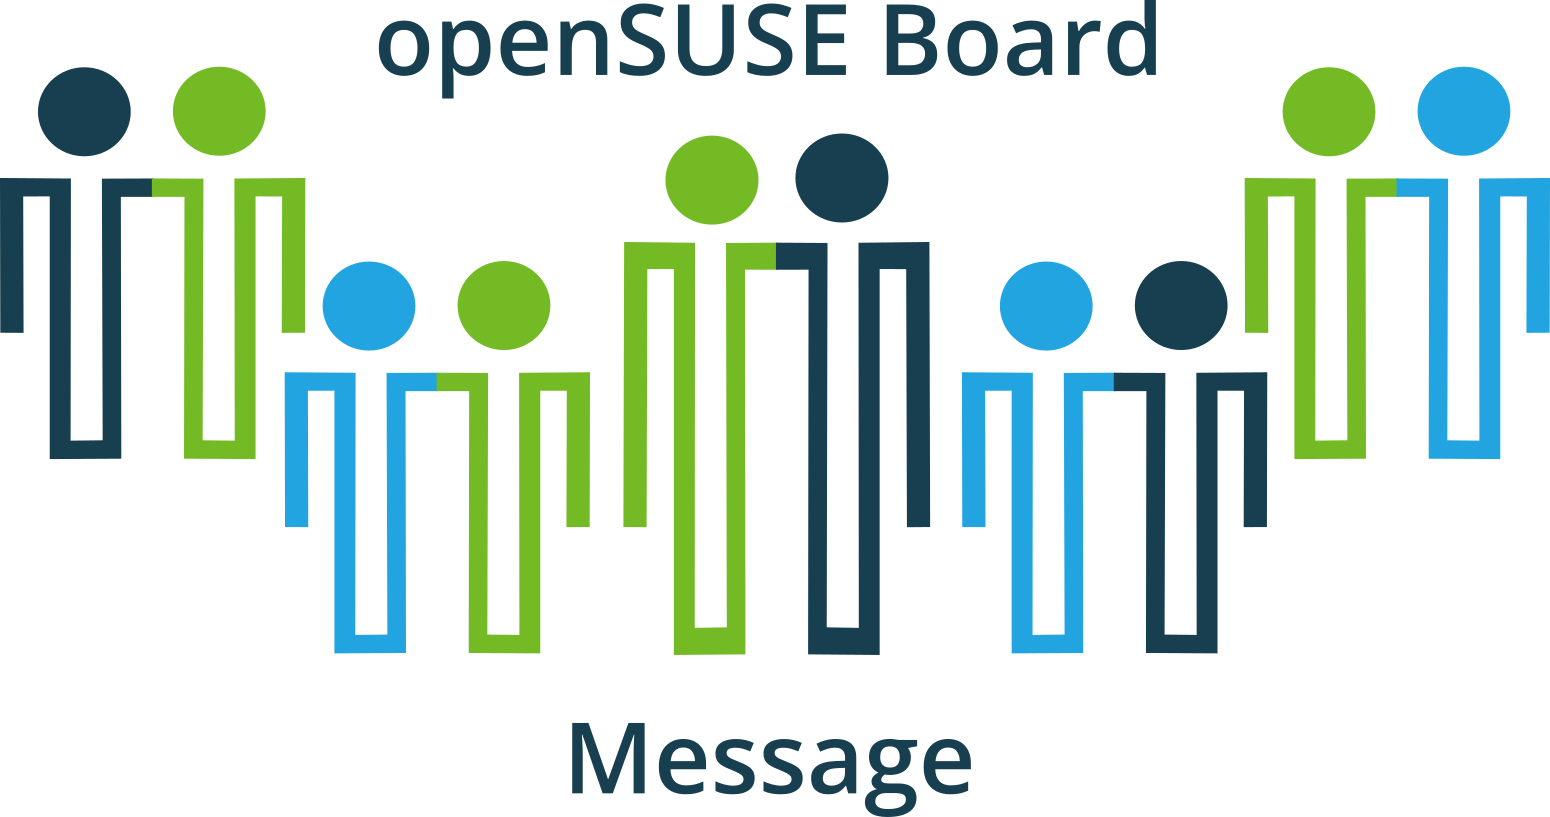 Message from the openSUSE Board